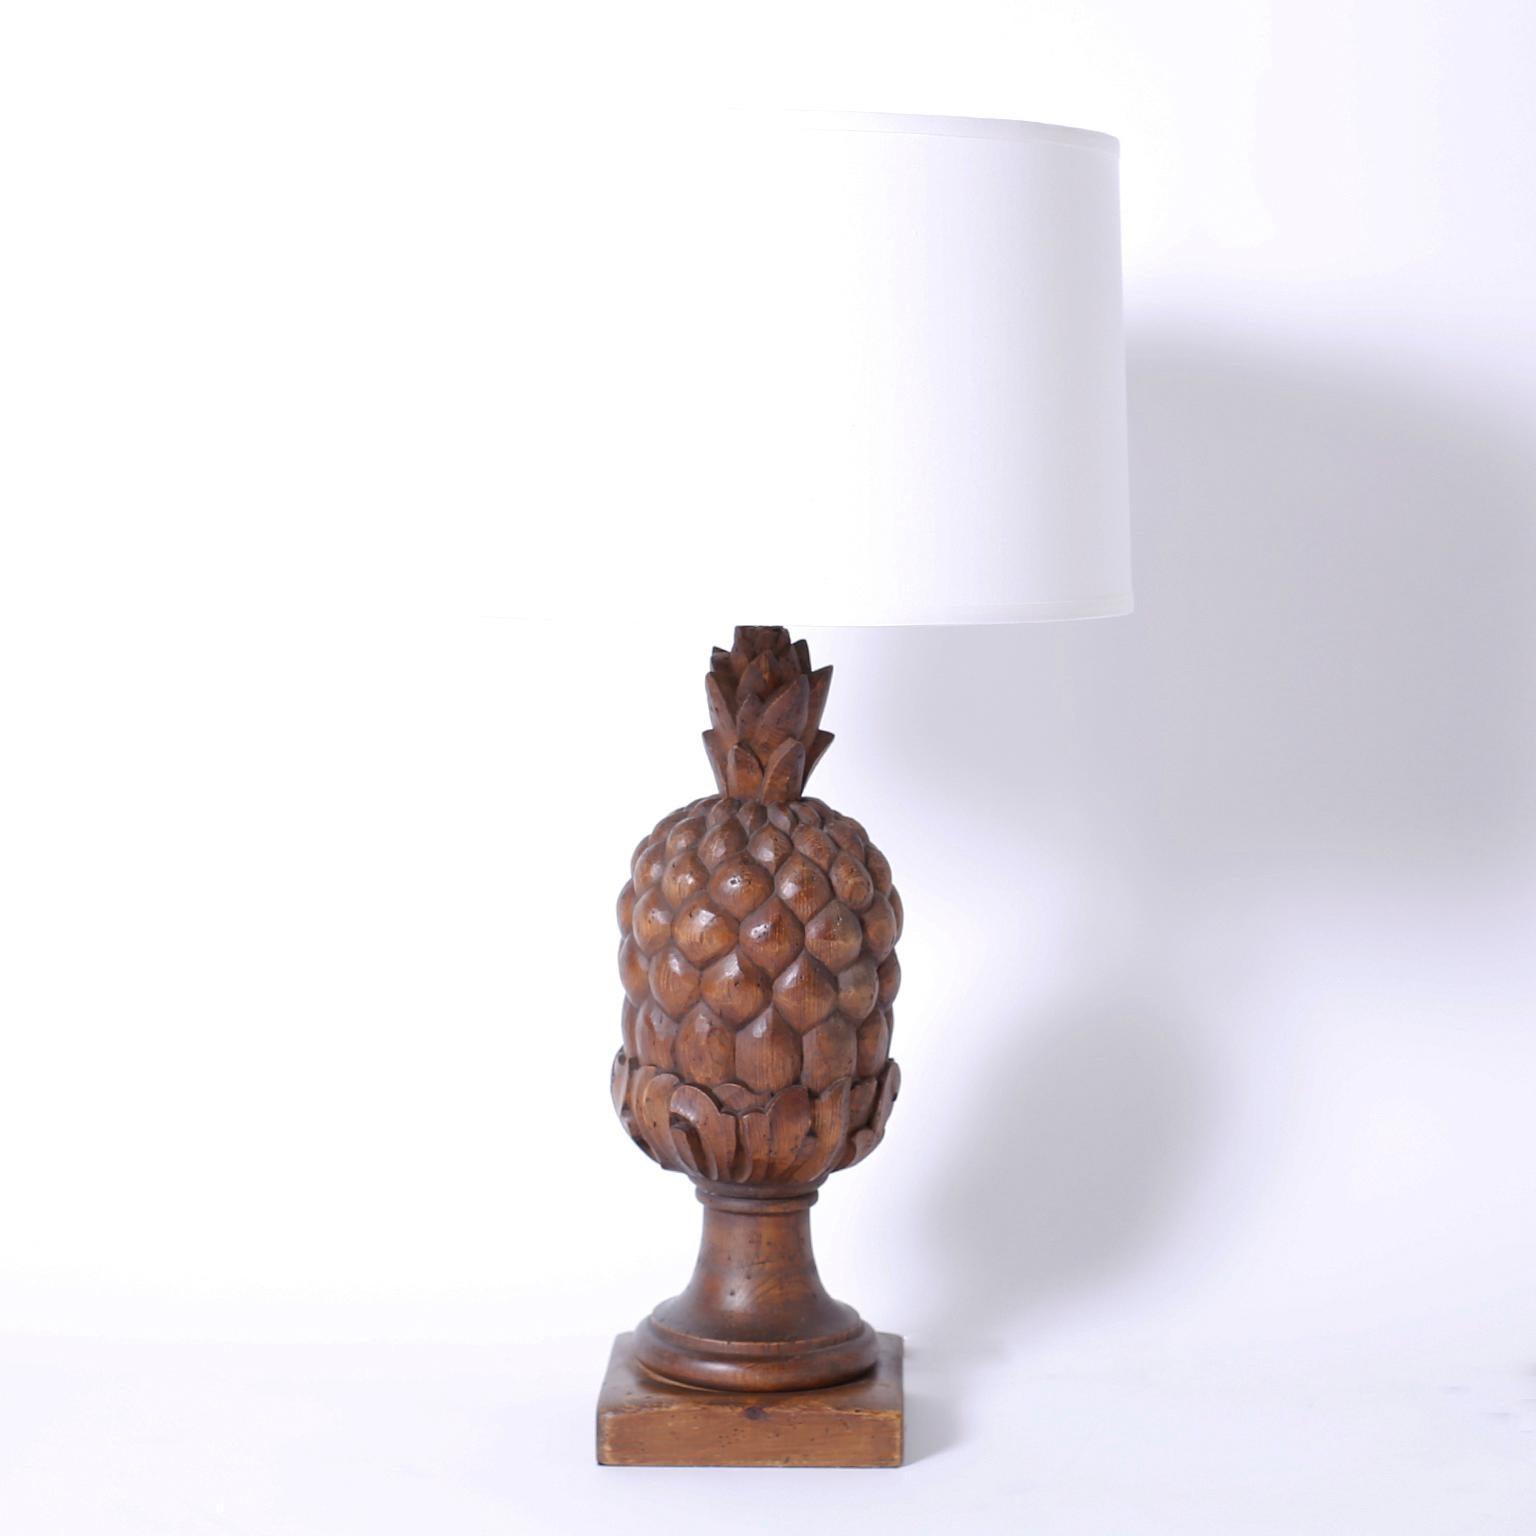 Pair of midcentury wood pineapple table lamps carved in a bold stylized technique and set on Classic wood plinths.